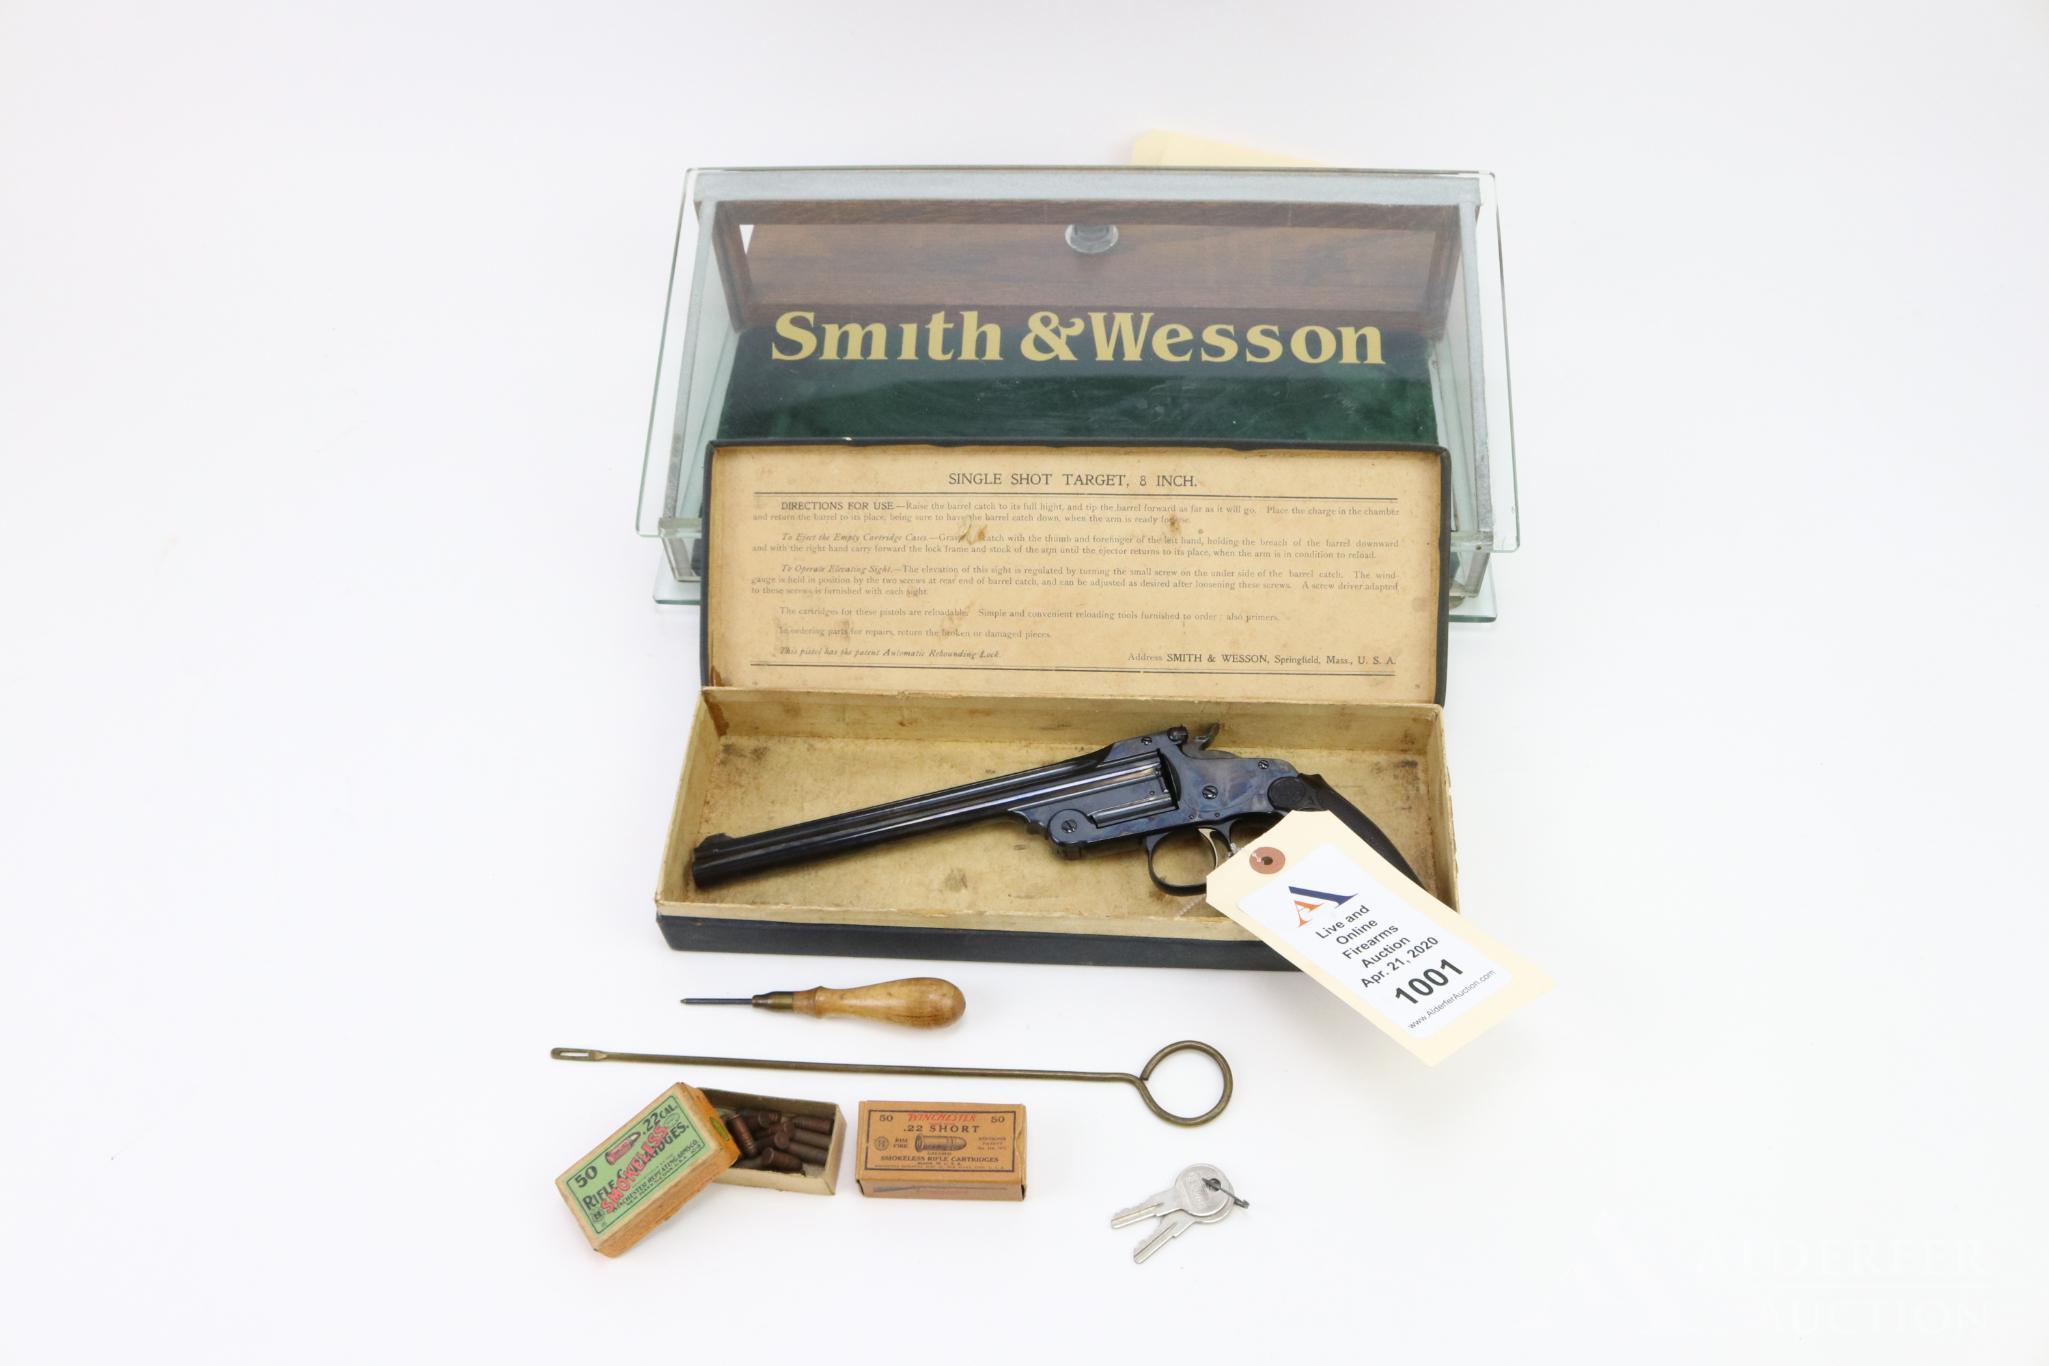 Smith & Wesson 1891 First Model Target single shot pistol.